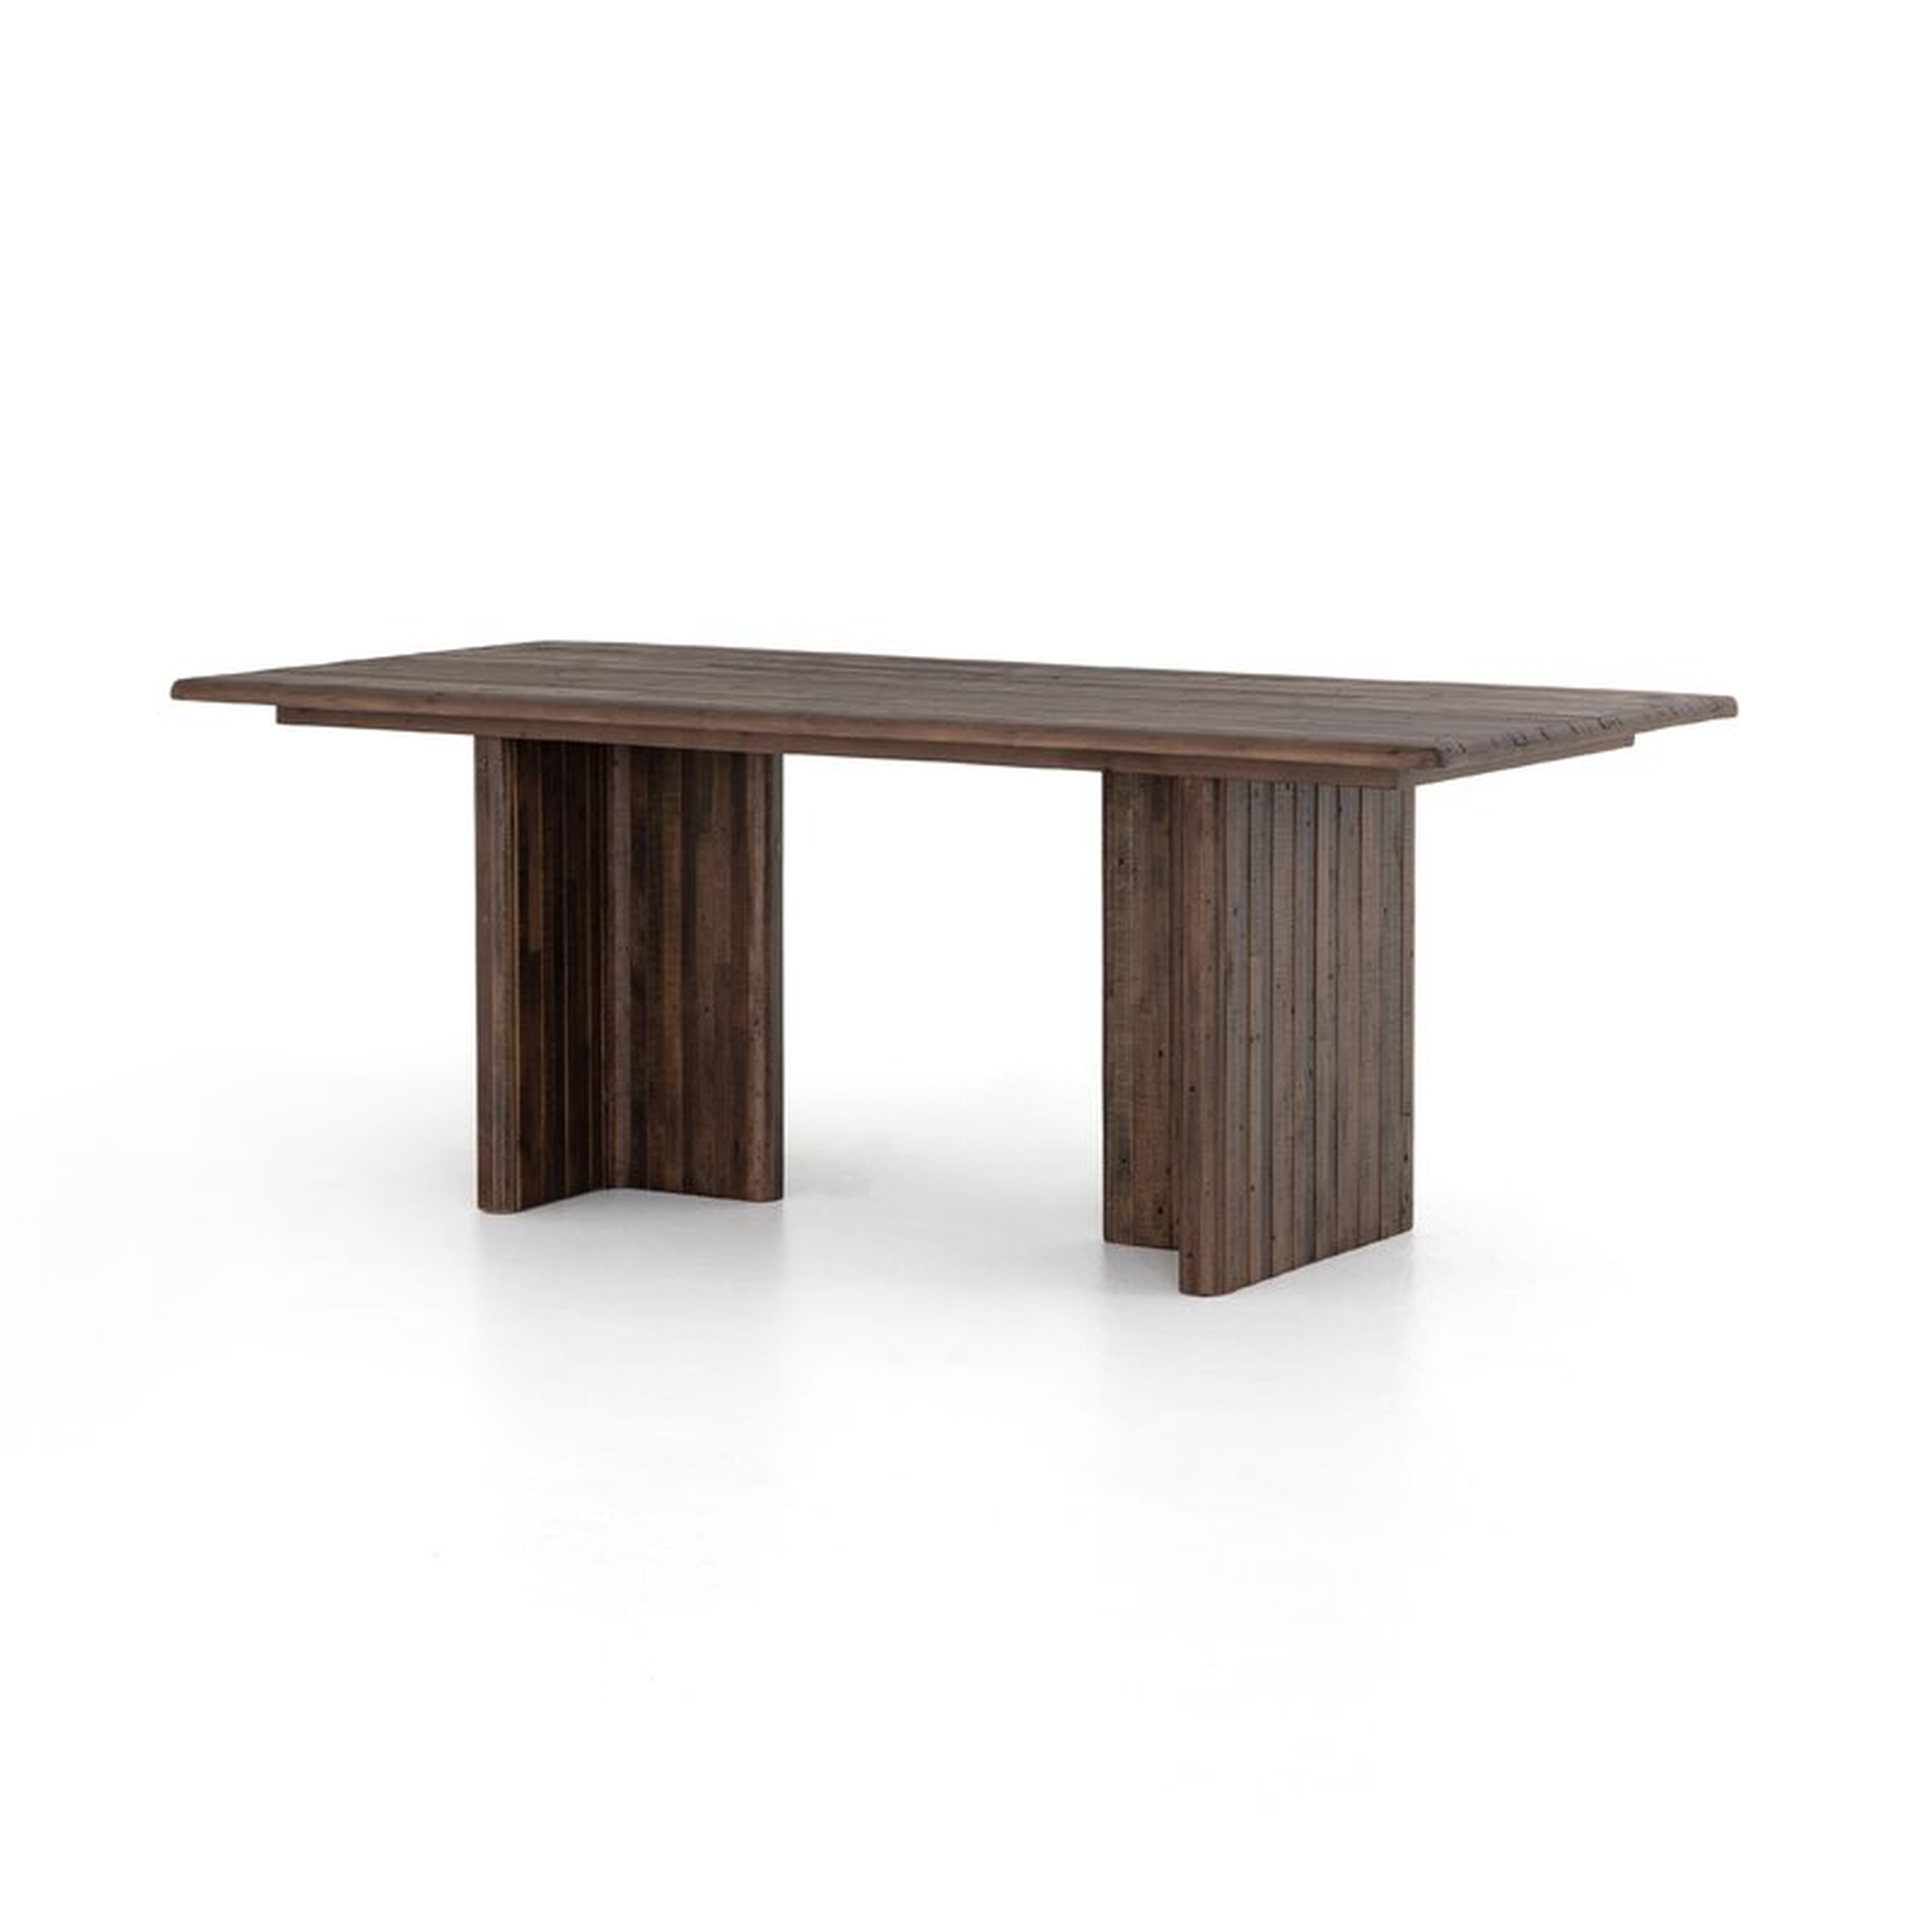 Four Hands Solid Wood Dining Table Size: 30" H x 80" L x 37.5" W - Perigold